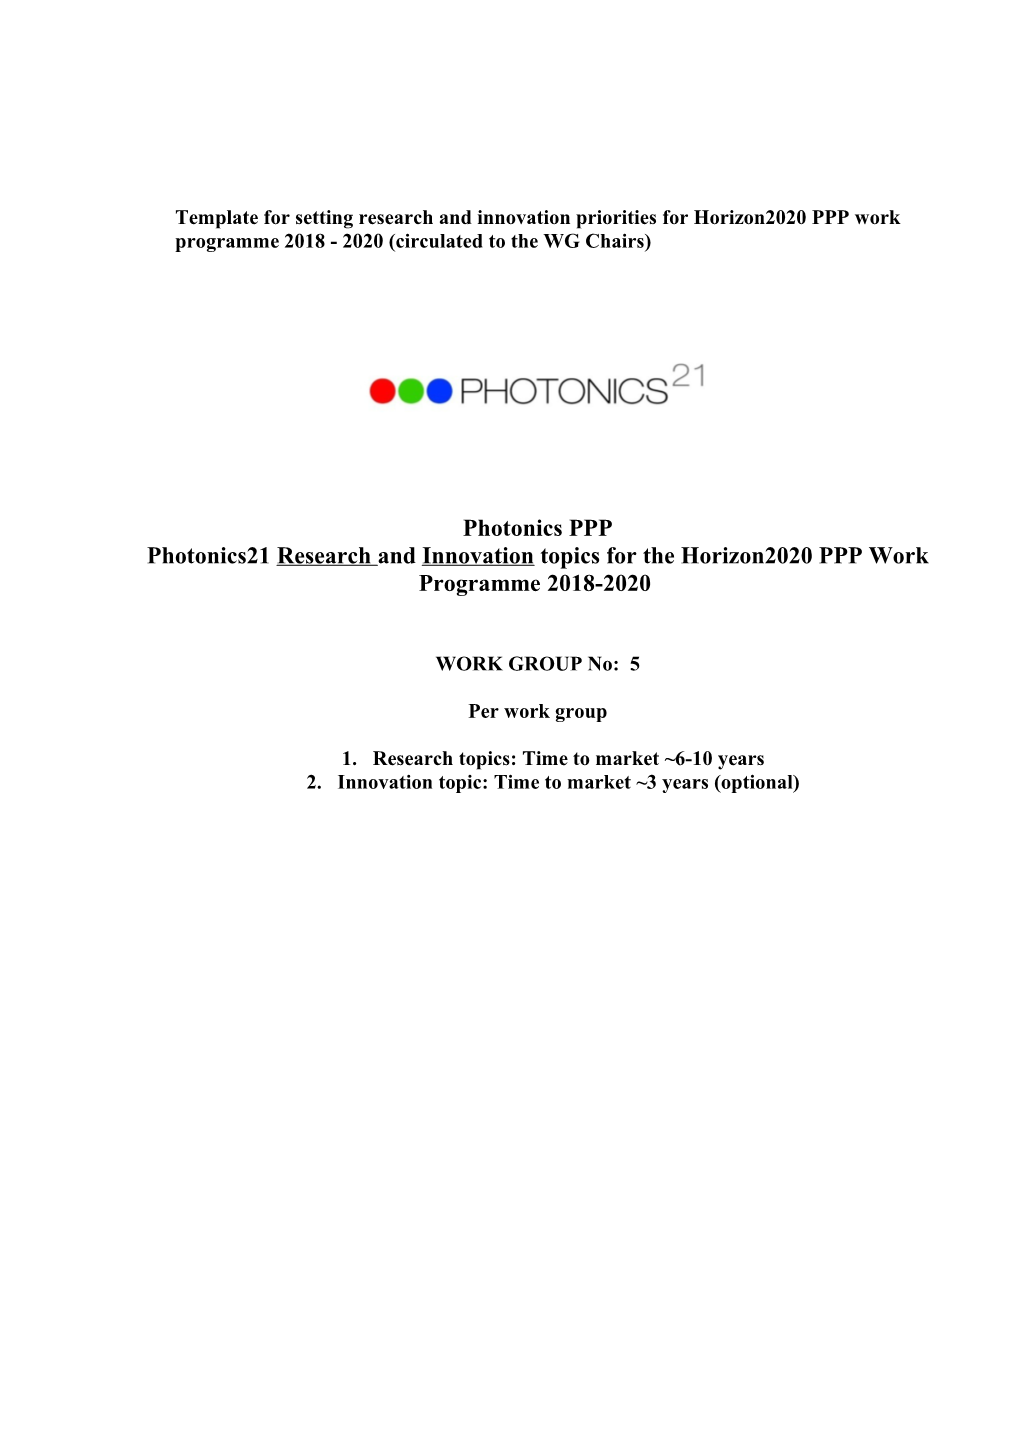 Template for Setting Research and Innovation Priorities for Horizon2020 PPP Work Programme